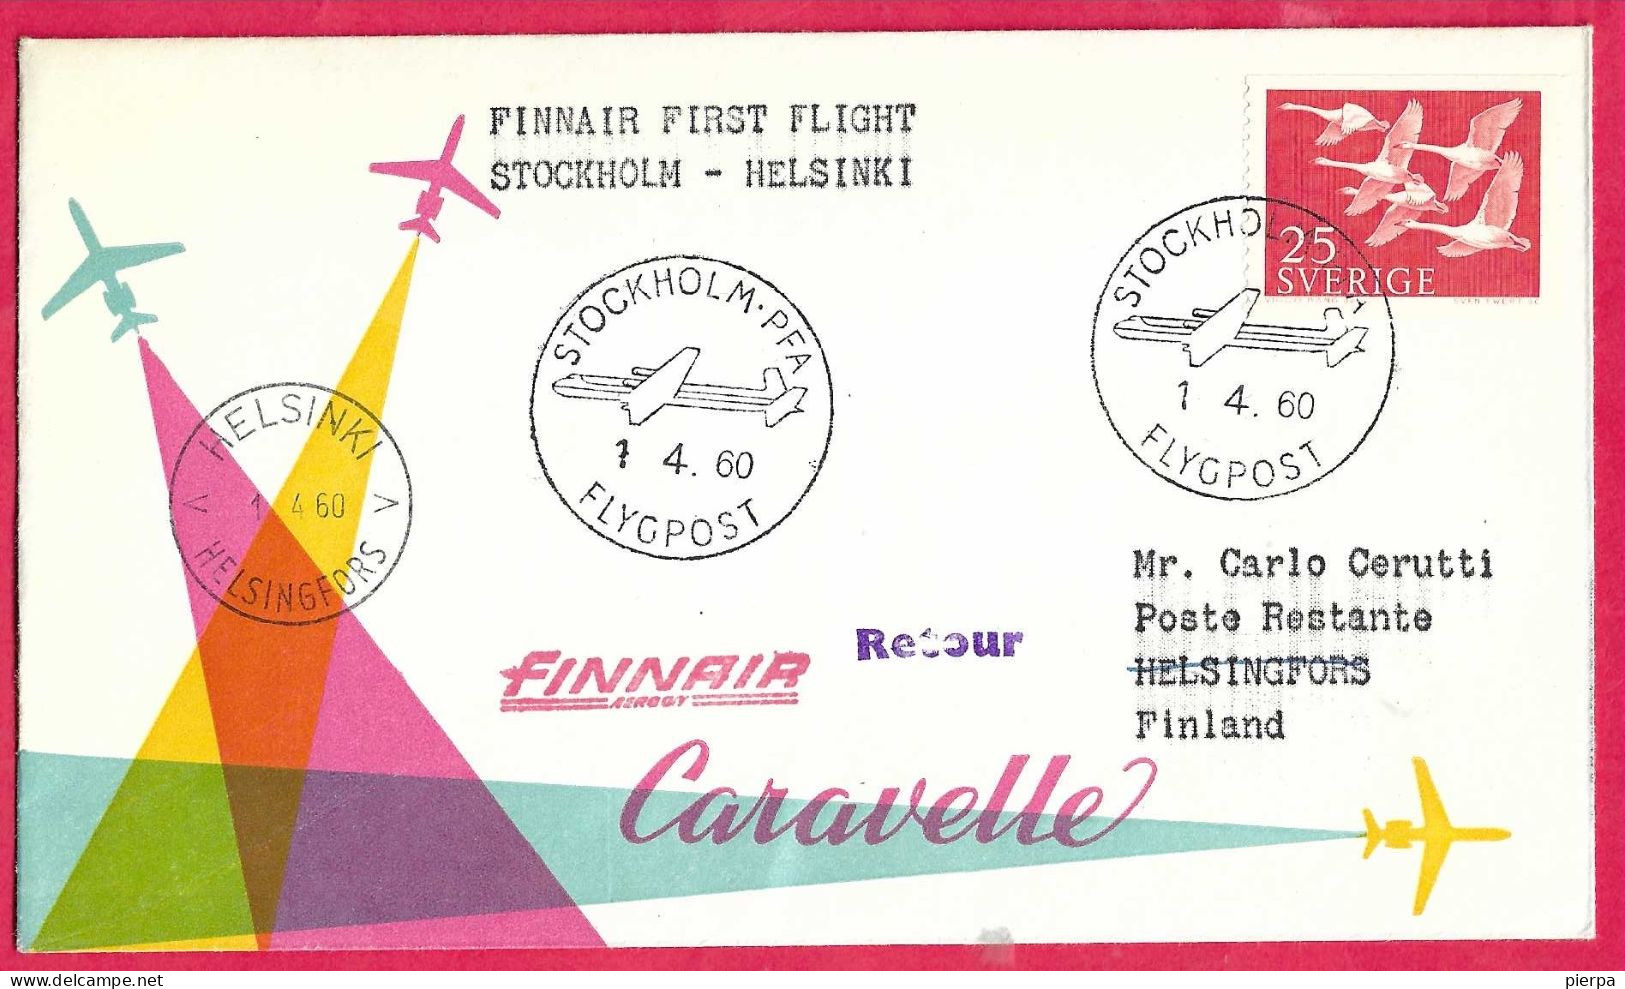 SVERIGE - FIRST FLIGHT FINNAIR WITH CARAVELLE FROM STOCKHOLM TO HELSINKI *1.4.60* ON OFFICIAL COVER - Covers & Documents